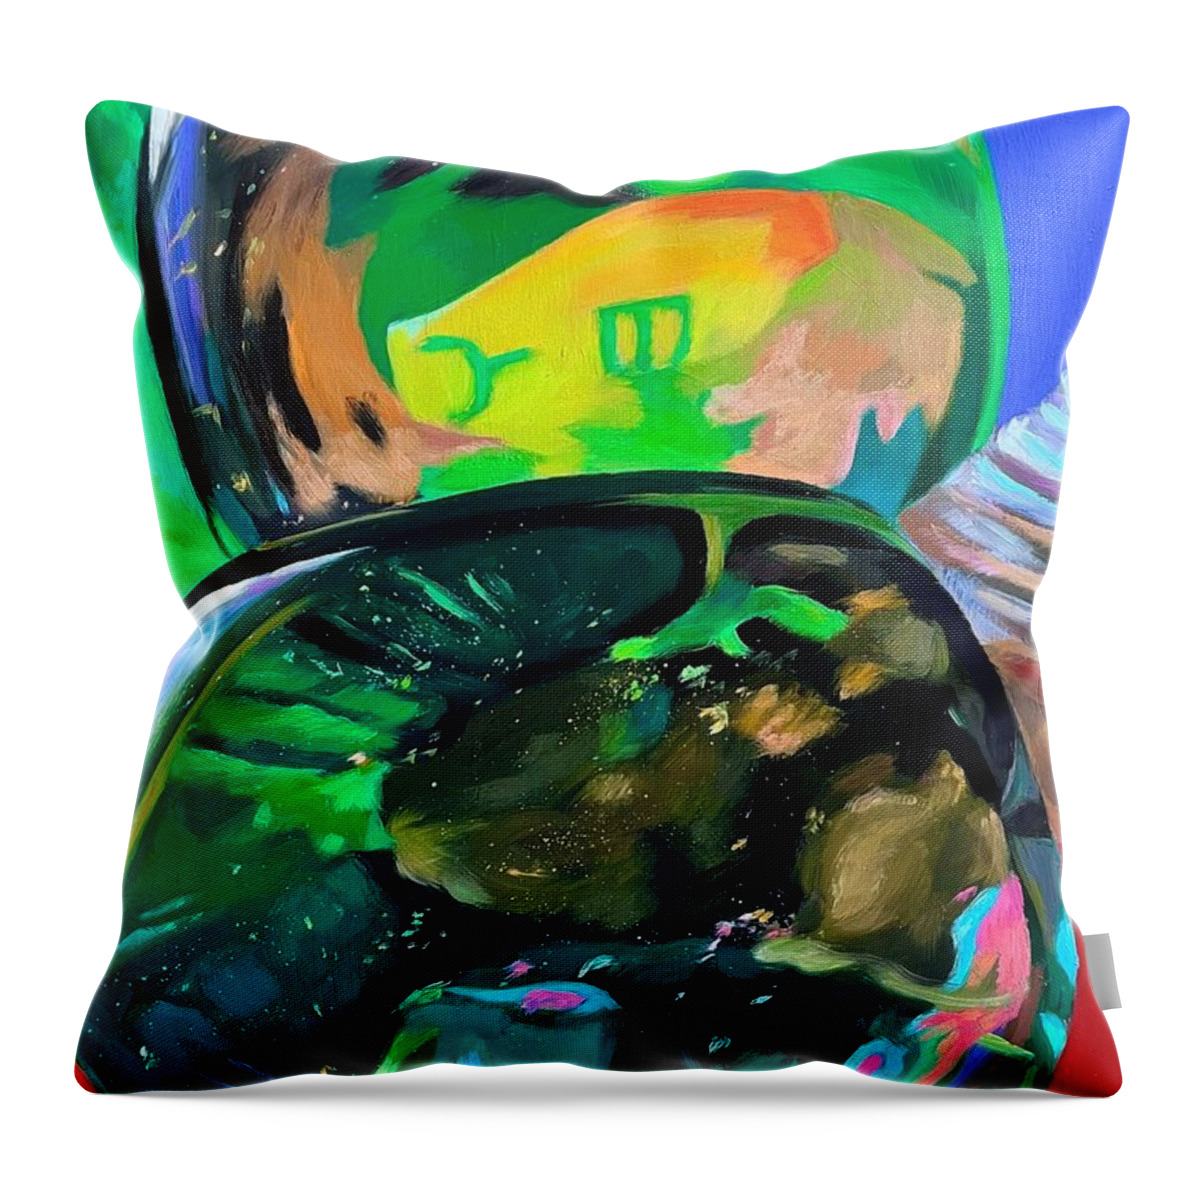 Abstract Throw Pillow featuring the painting Verde View by Rachel Suzanne Beck